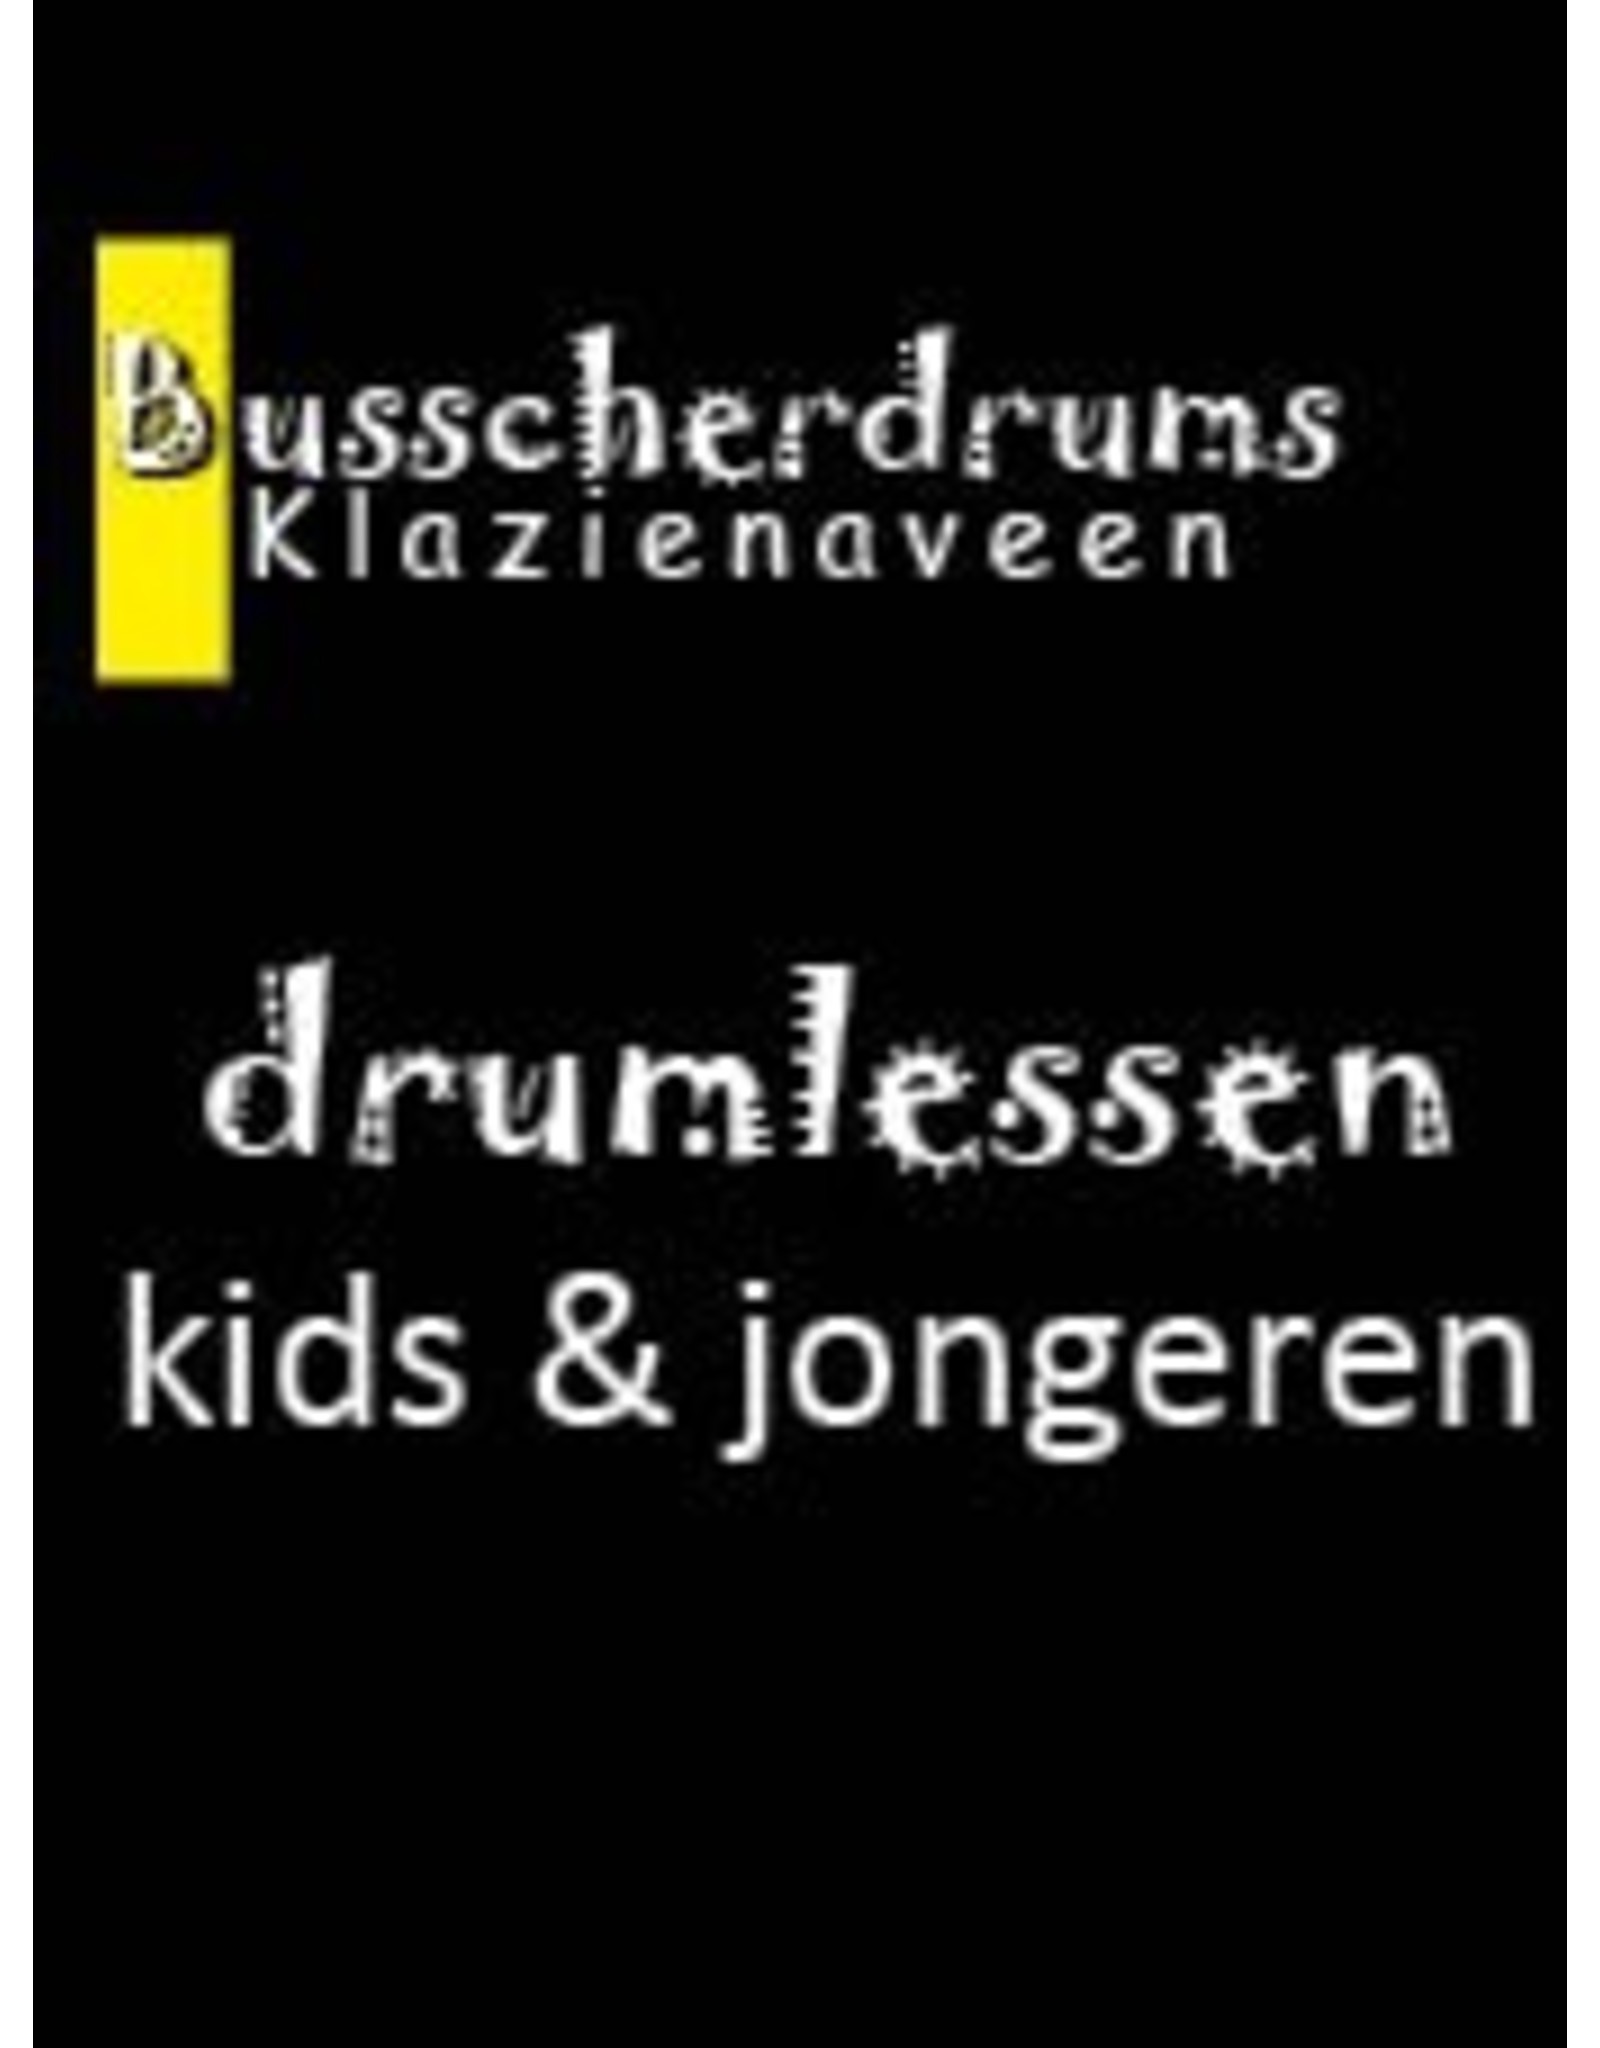 Busscherdrums Drum Lessons card 38 x 30-minute weekly youth 603